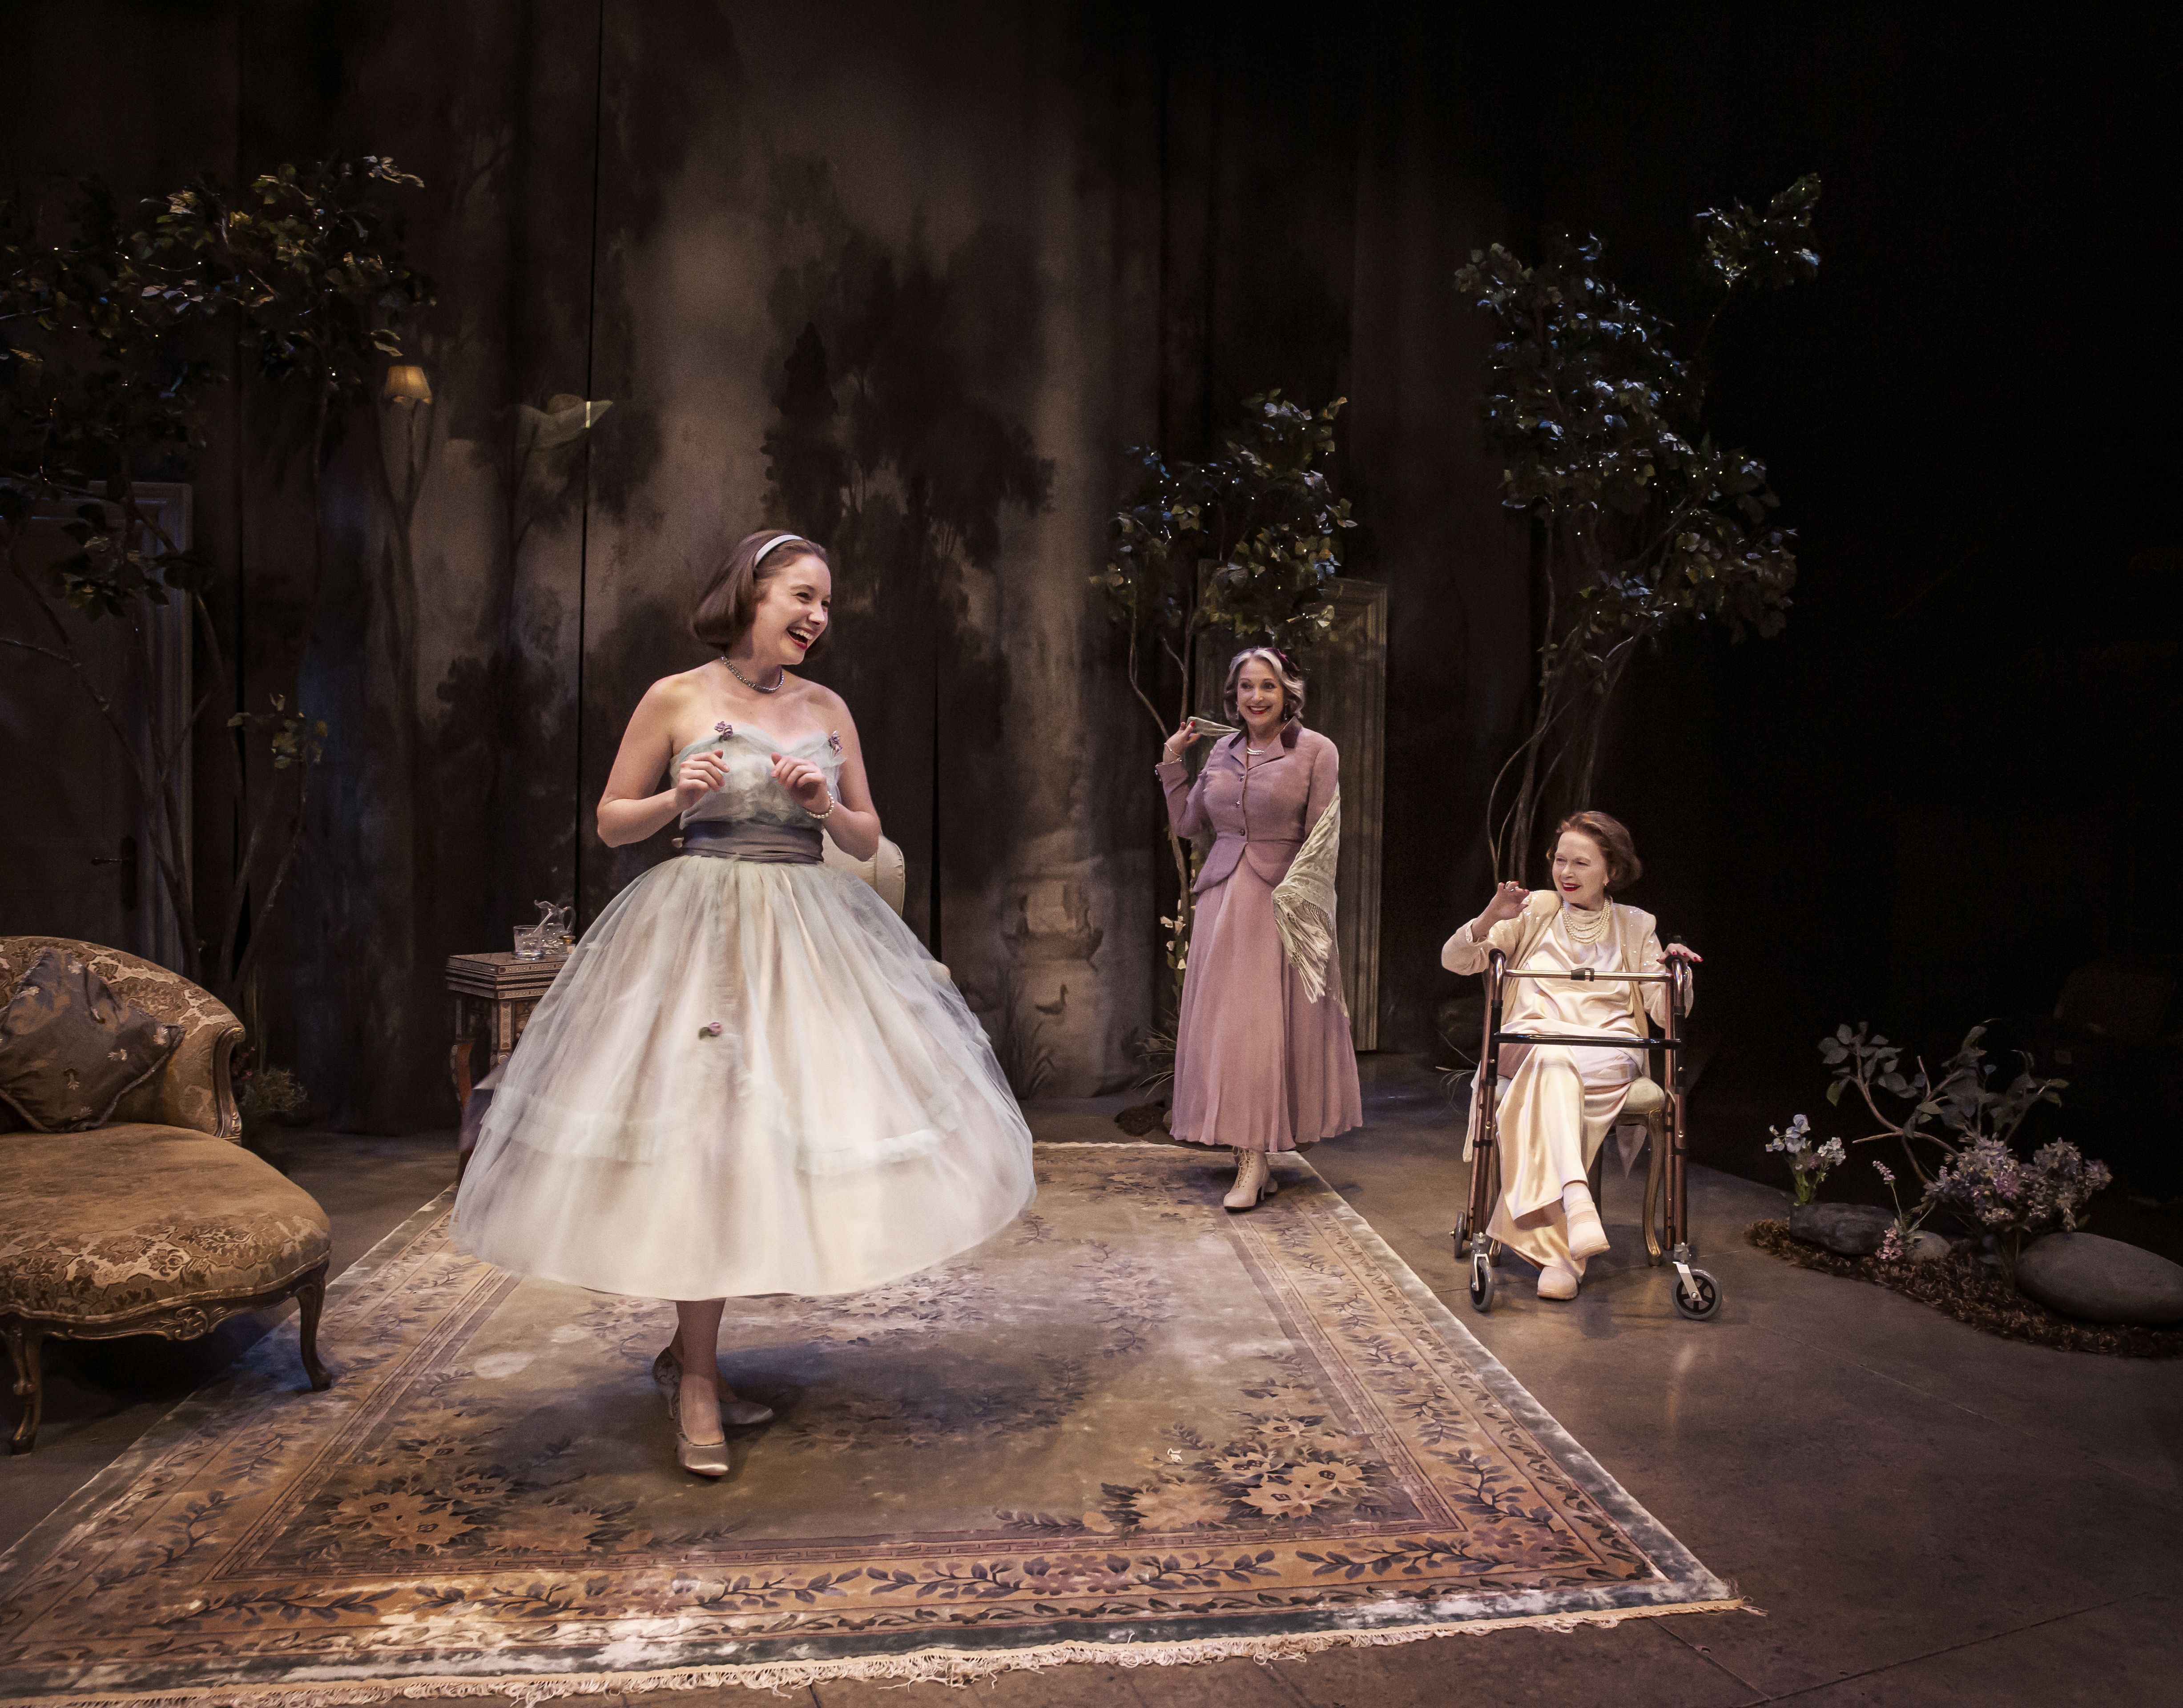 Review: Stratford Festival: Three Tall Women is one nasty evening